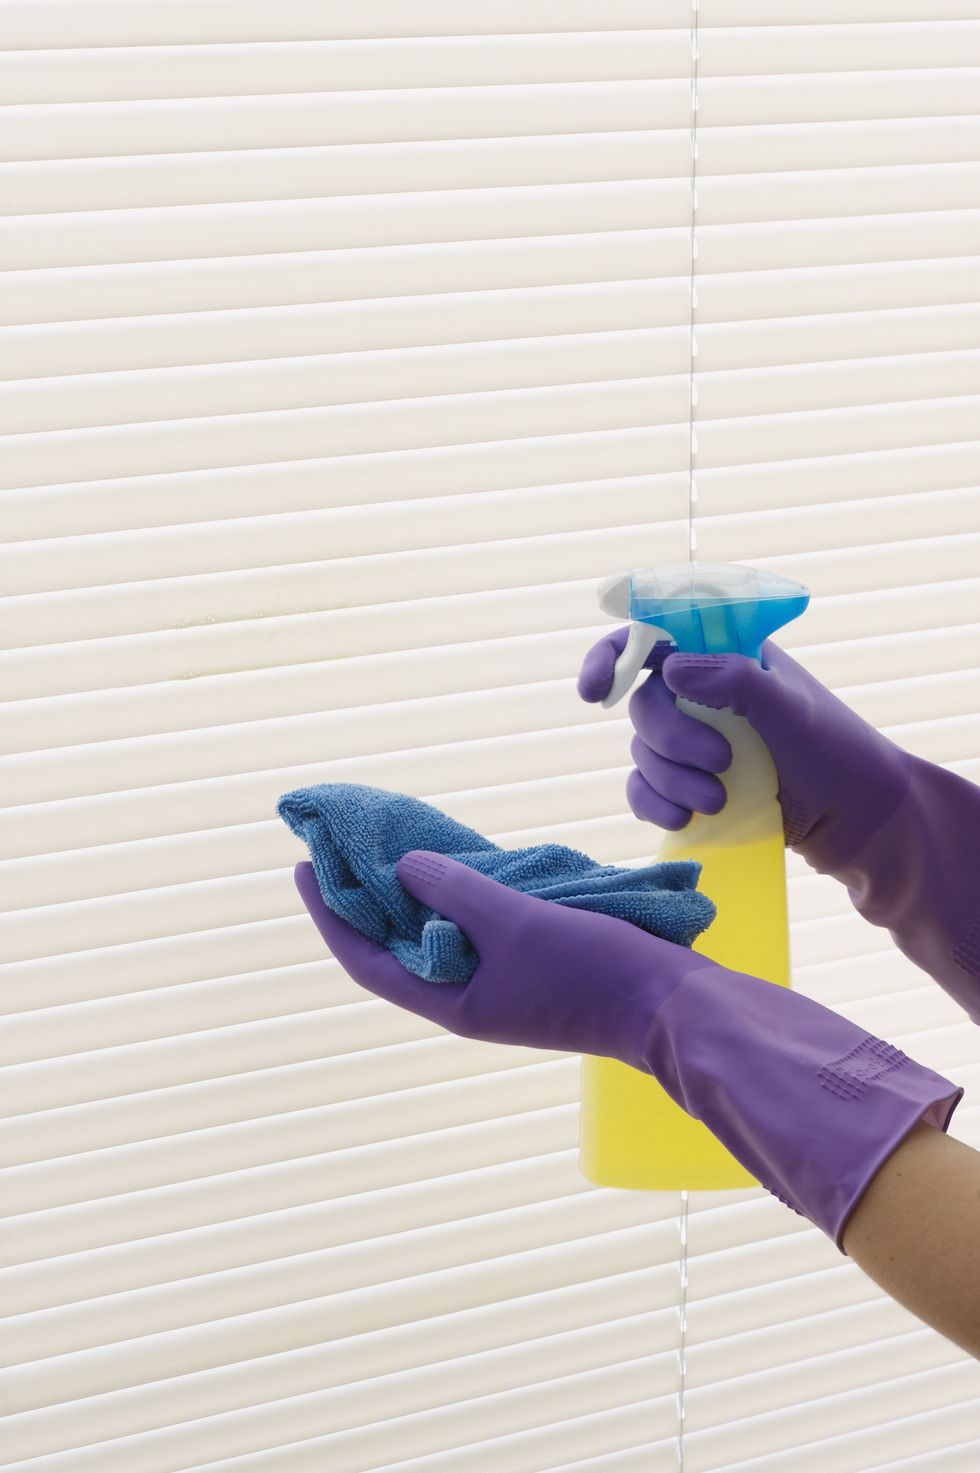 Pair of hands in purple rubber gloves cleaning blinds with spray and cloth